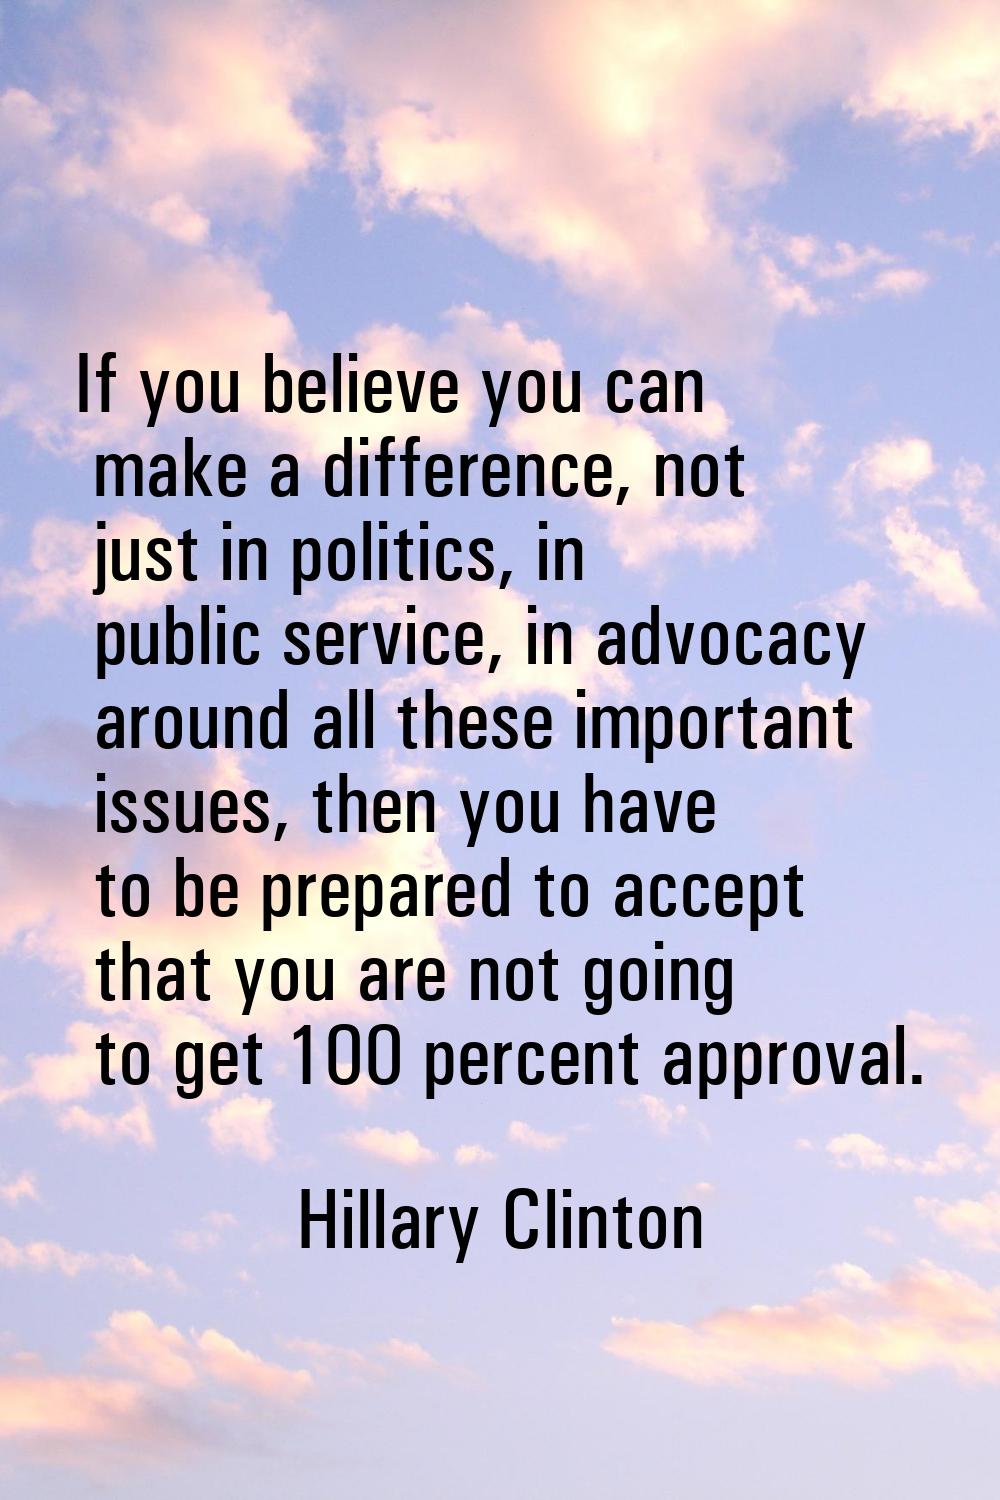 If you believe you can make a difference, not just in politics, in public service, in advocacy arou